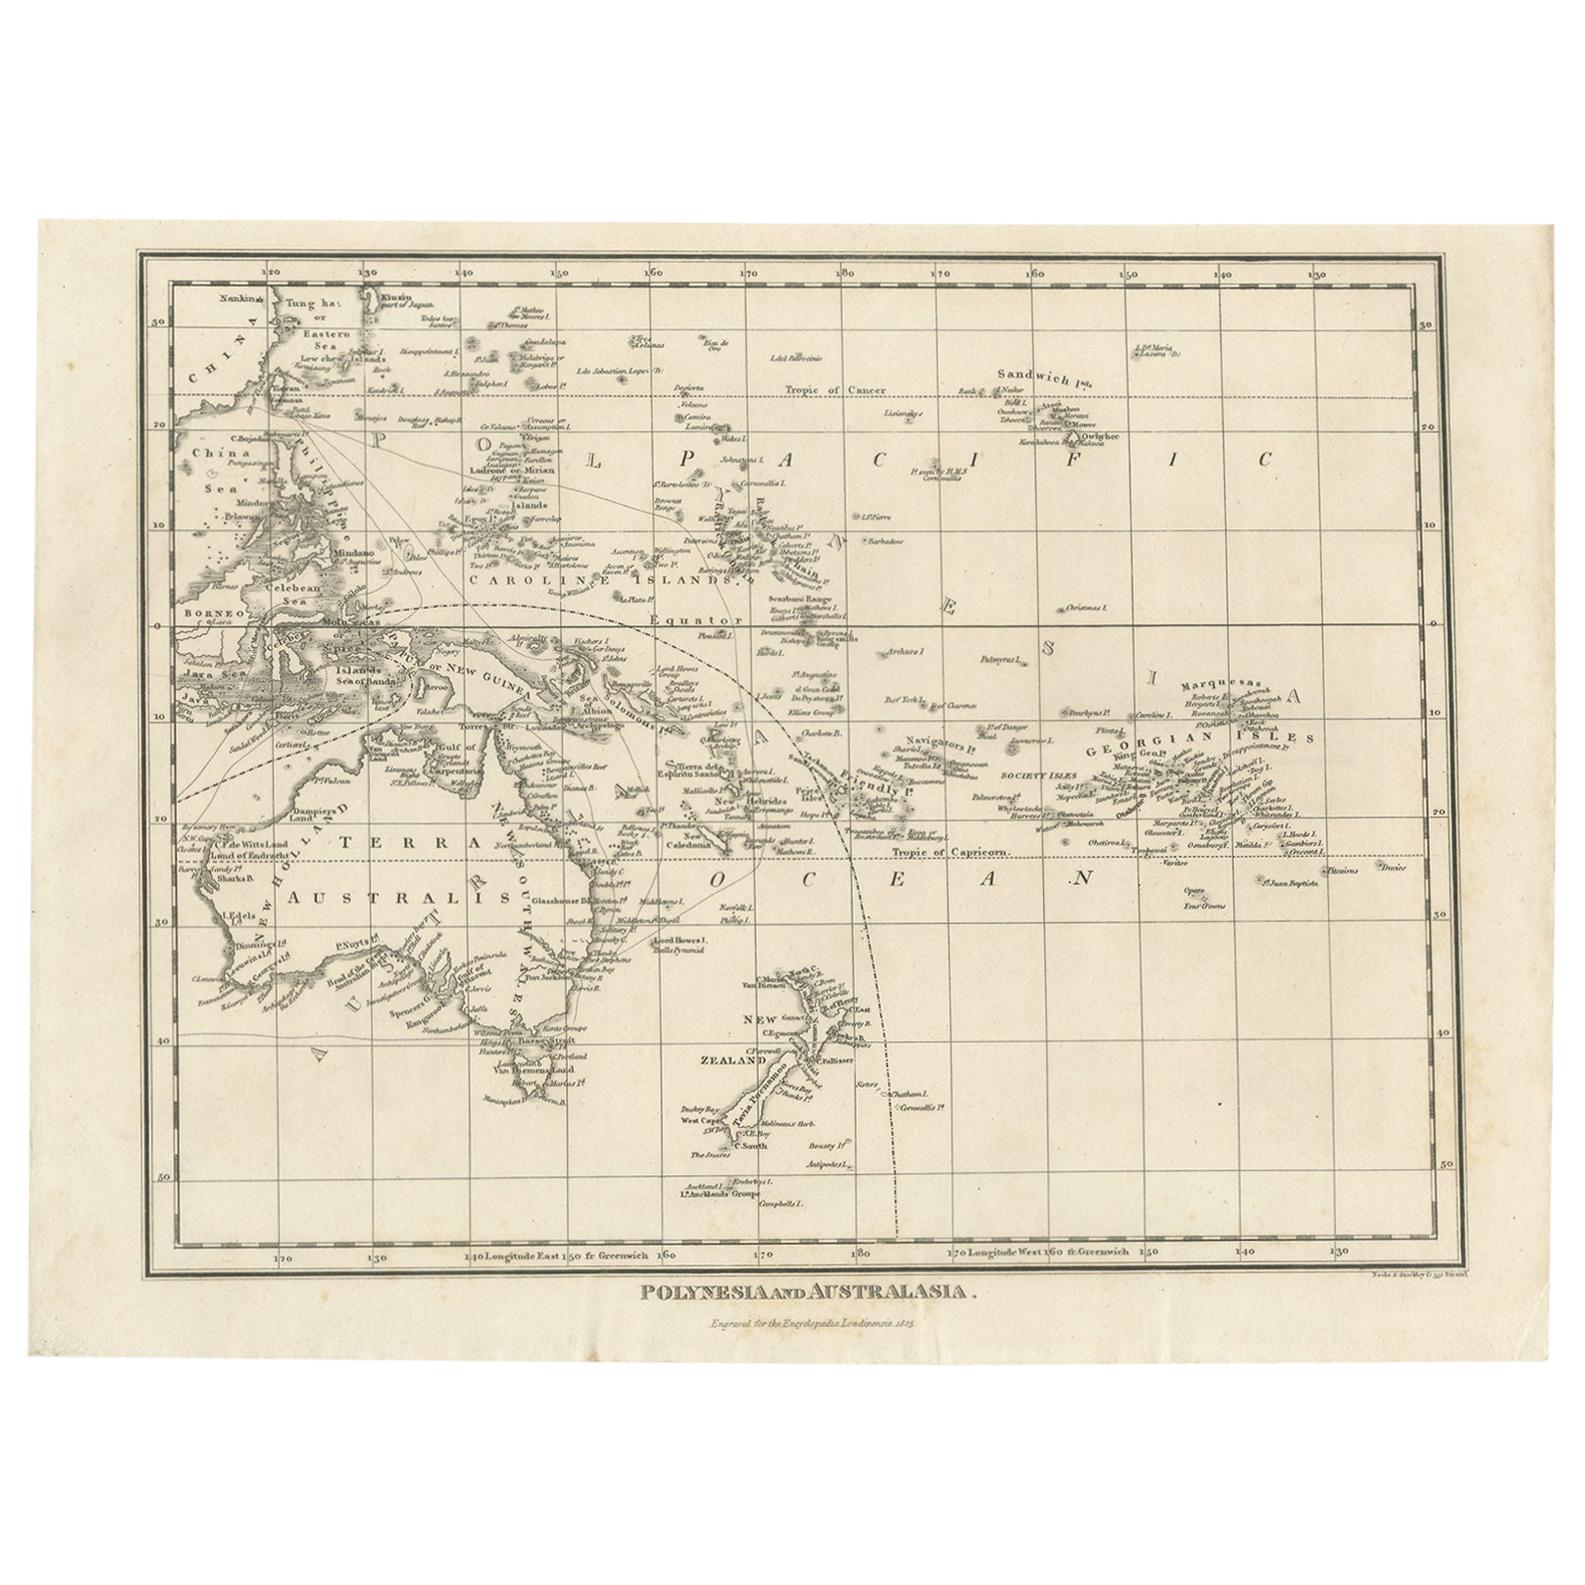 Antique Map of Polynesia and Australasia by Neele, 1825